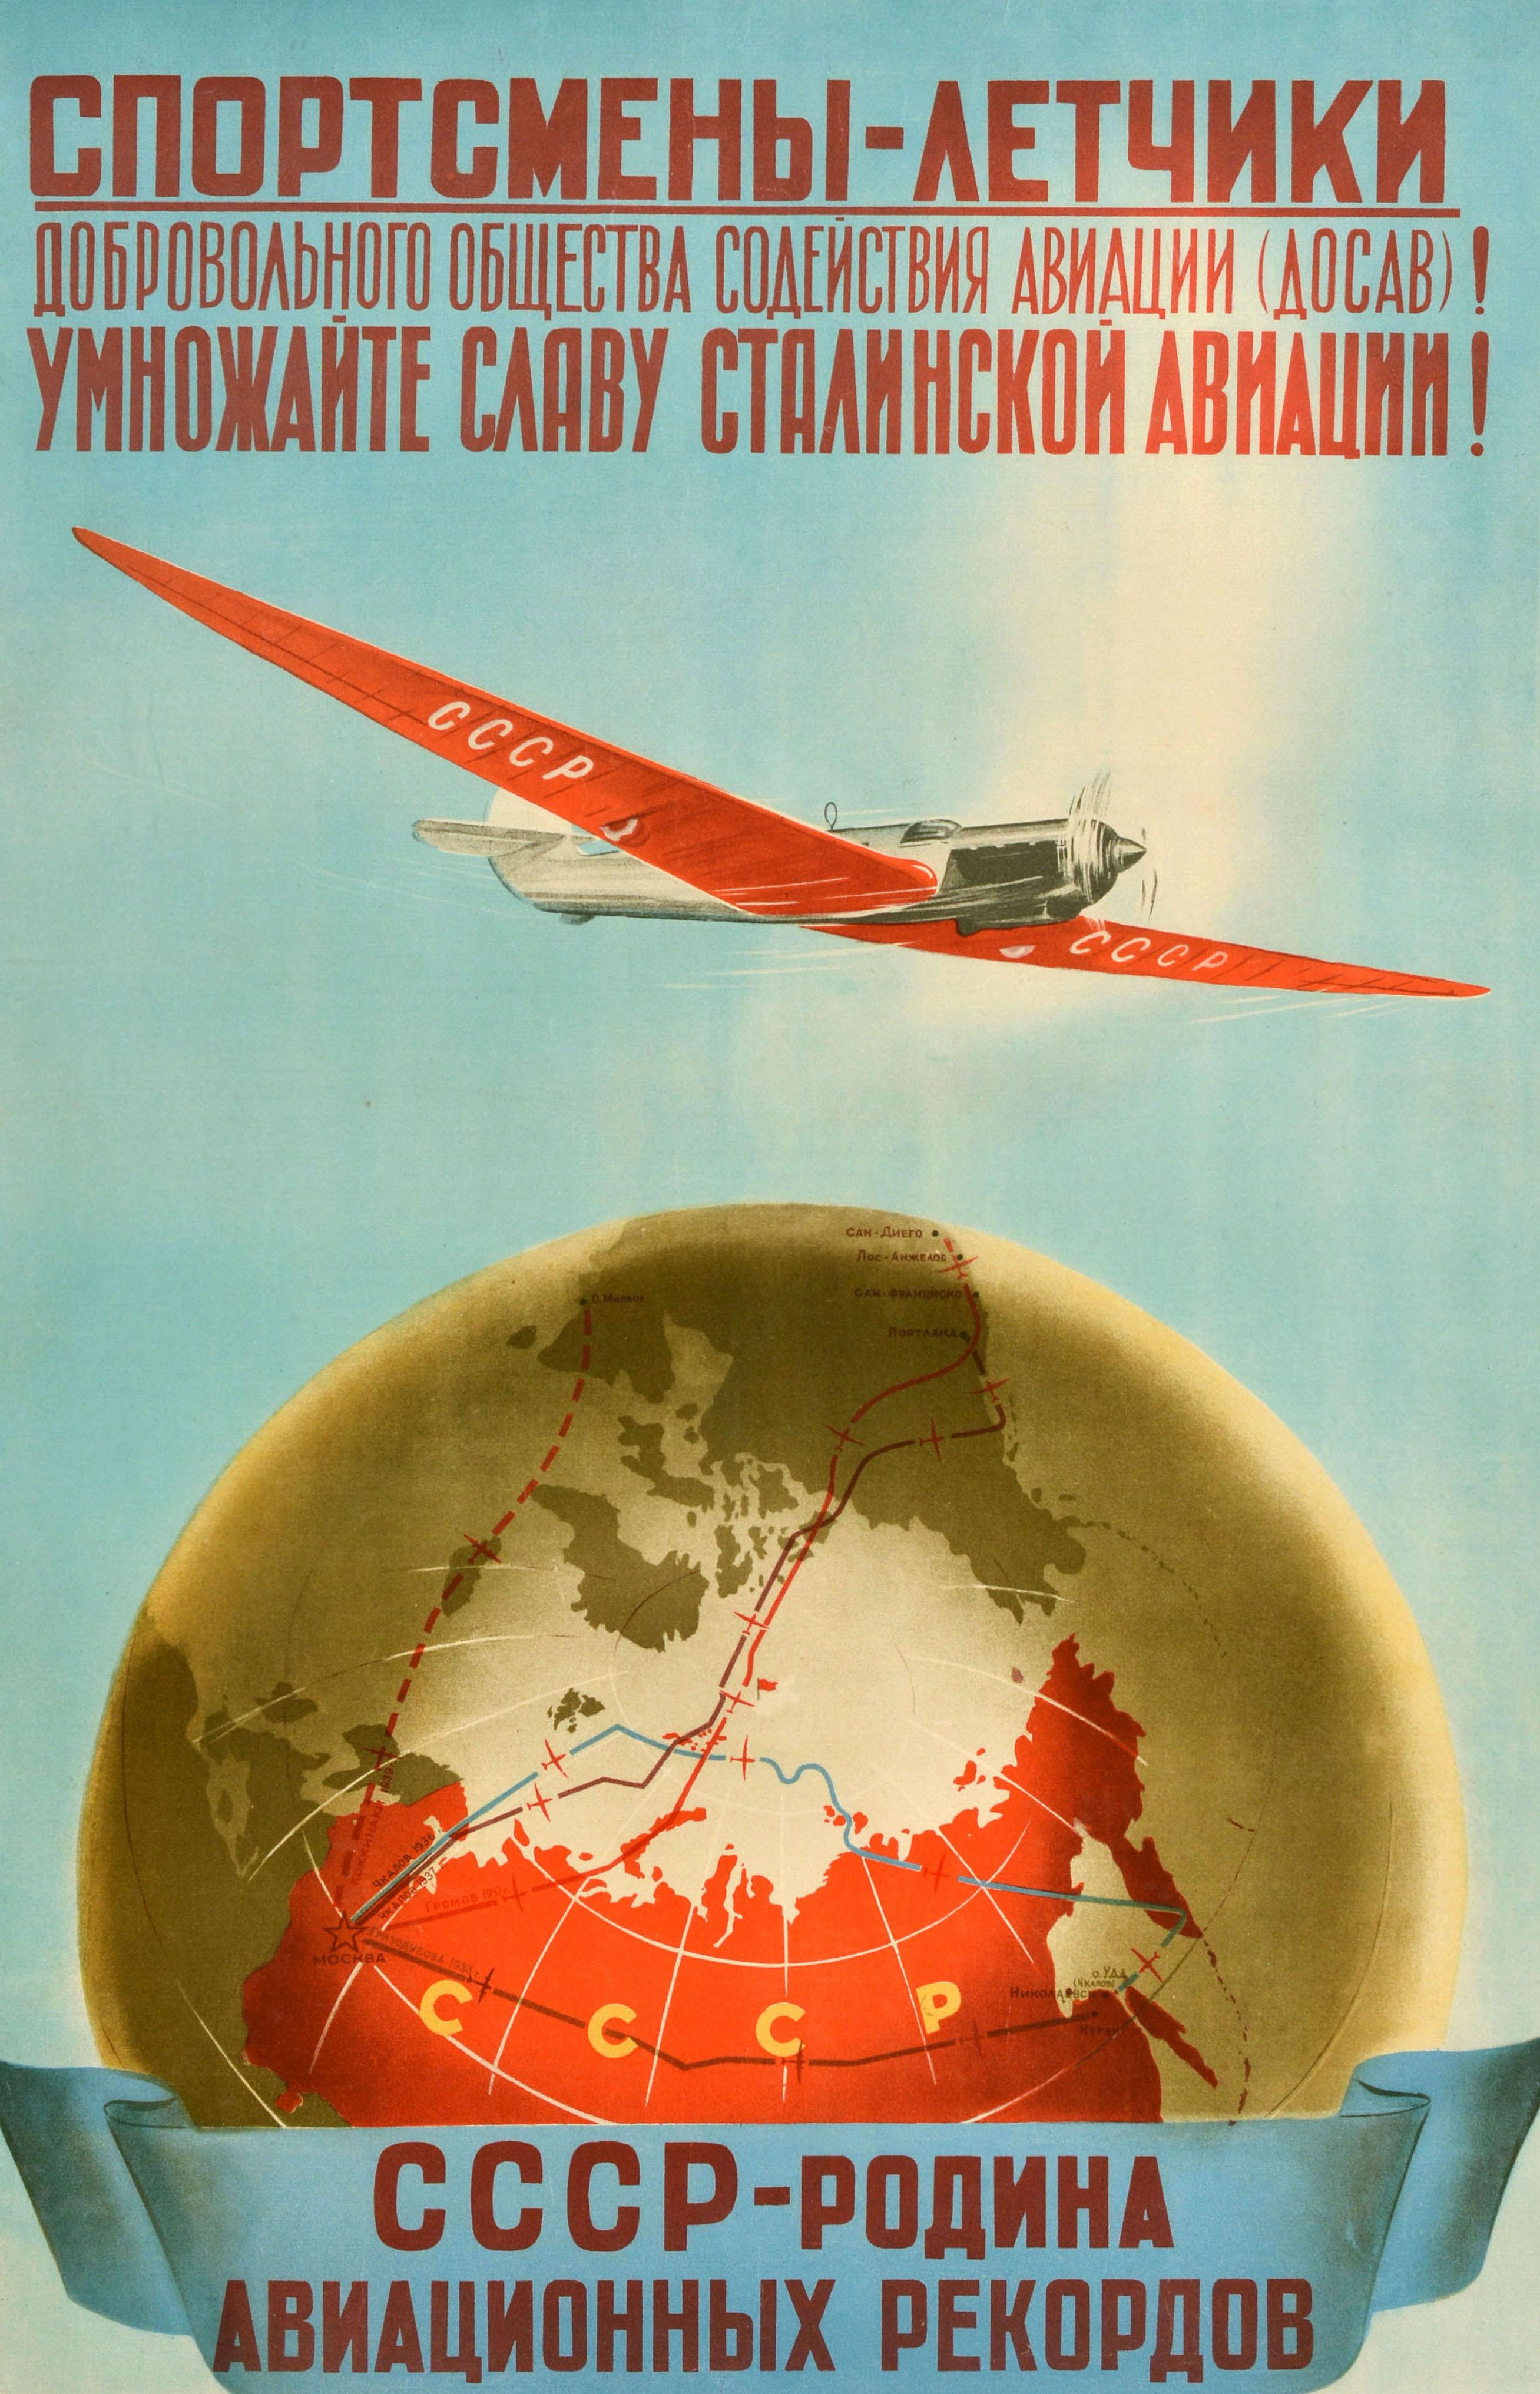 Original vintage Soviet propaganda poster - Athlete pilots of the voluntary society for the promotion of aviation Increase the glory of Stalin's aviation USSR The birthplace of aviation records - featuring an illustration of a plane marked CCCP /